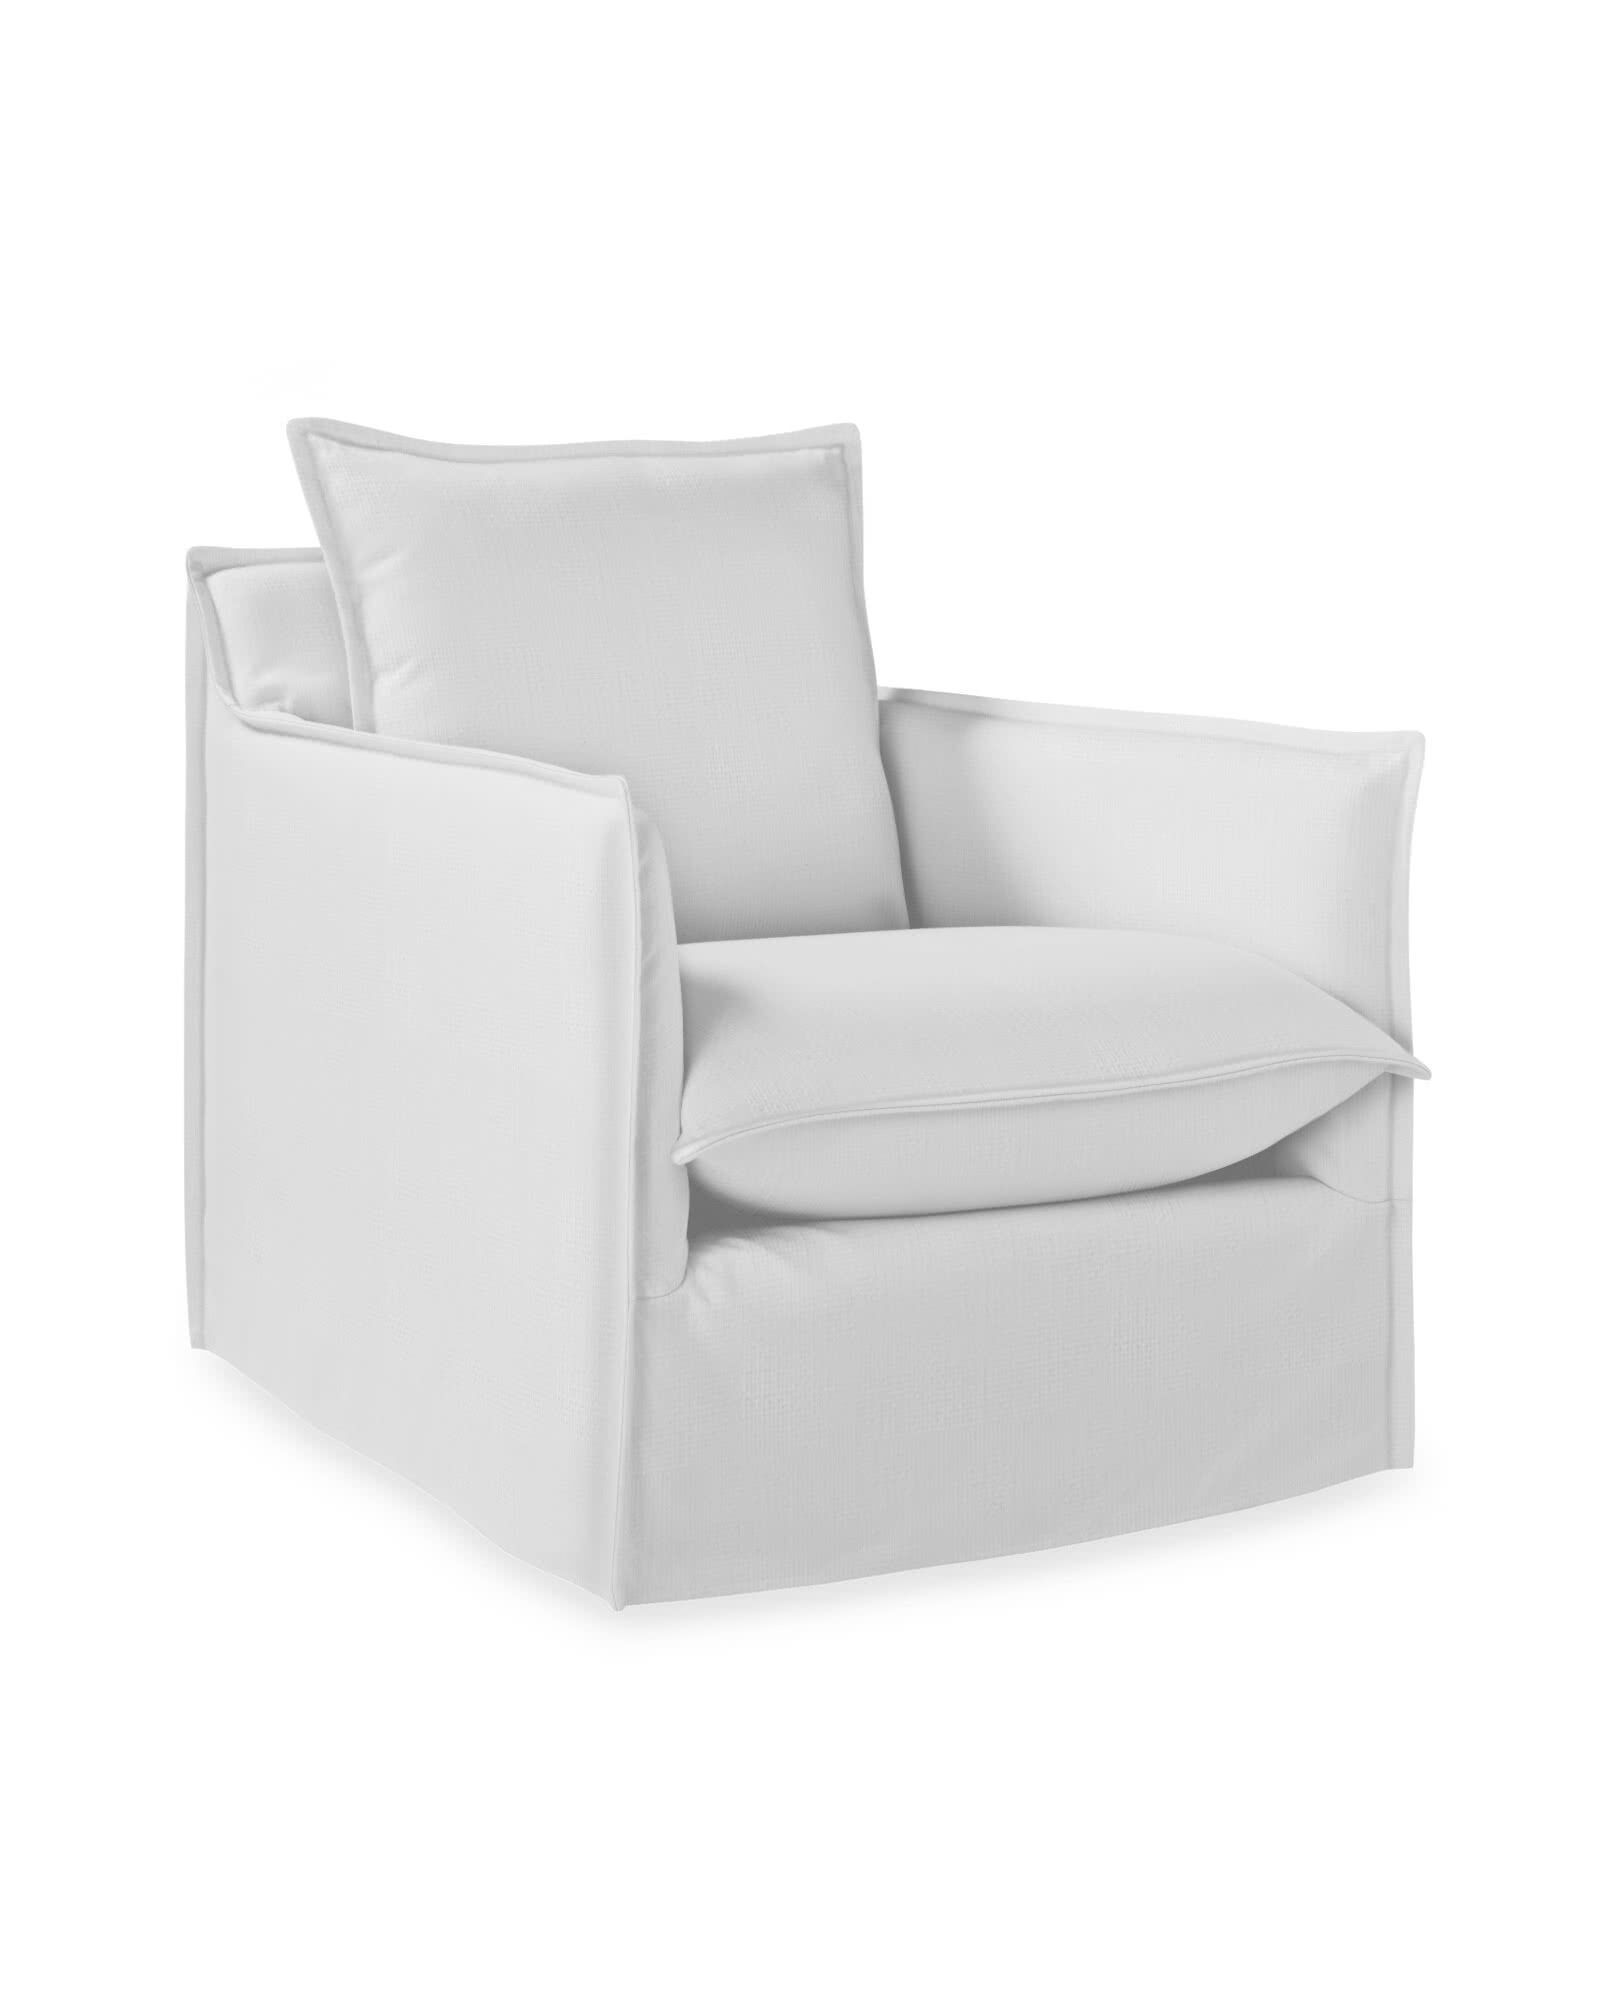 Hayden Swivel Glider - Slipcovered | Serena and Lily